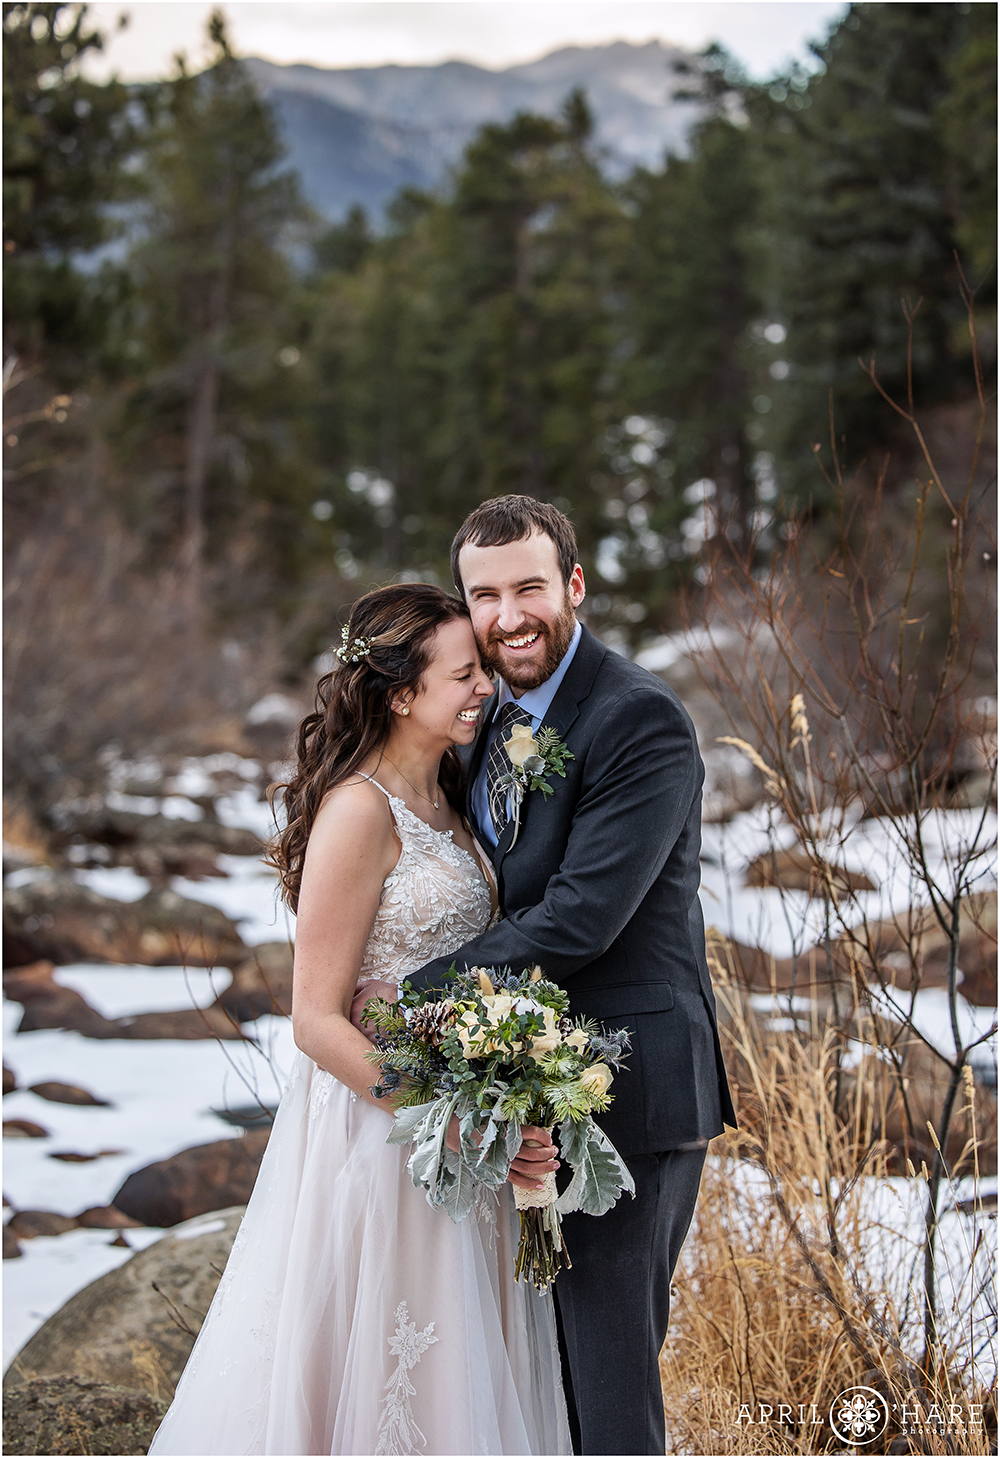 Candid natural wedding day portrait of a couple cracking up together in front of a beautiful icy river inside Rocky Mountain National Park